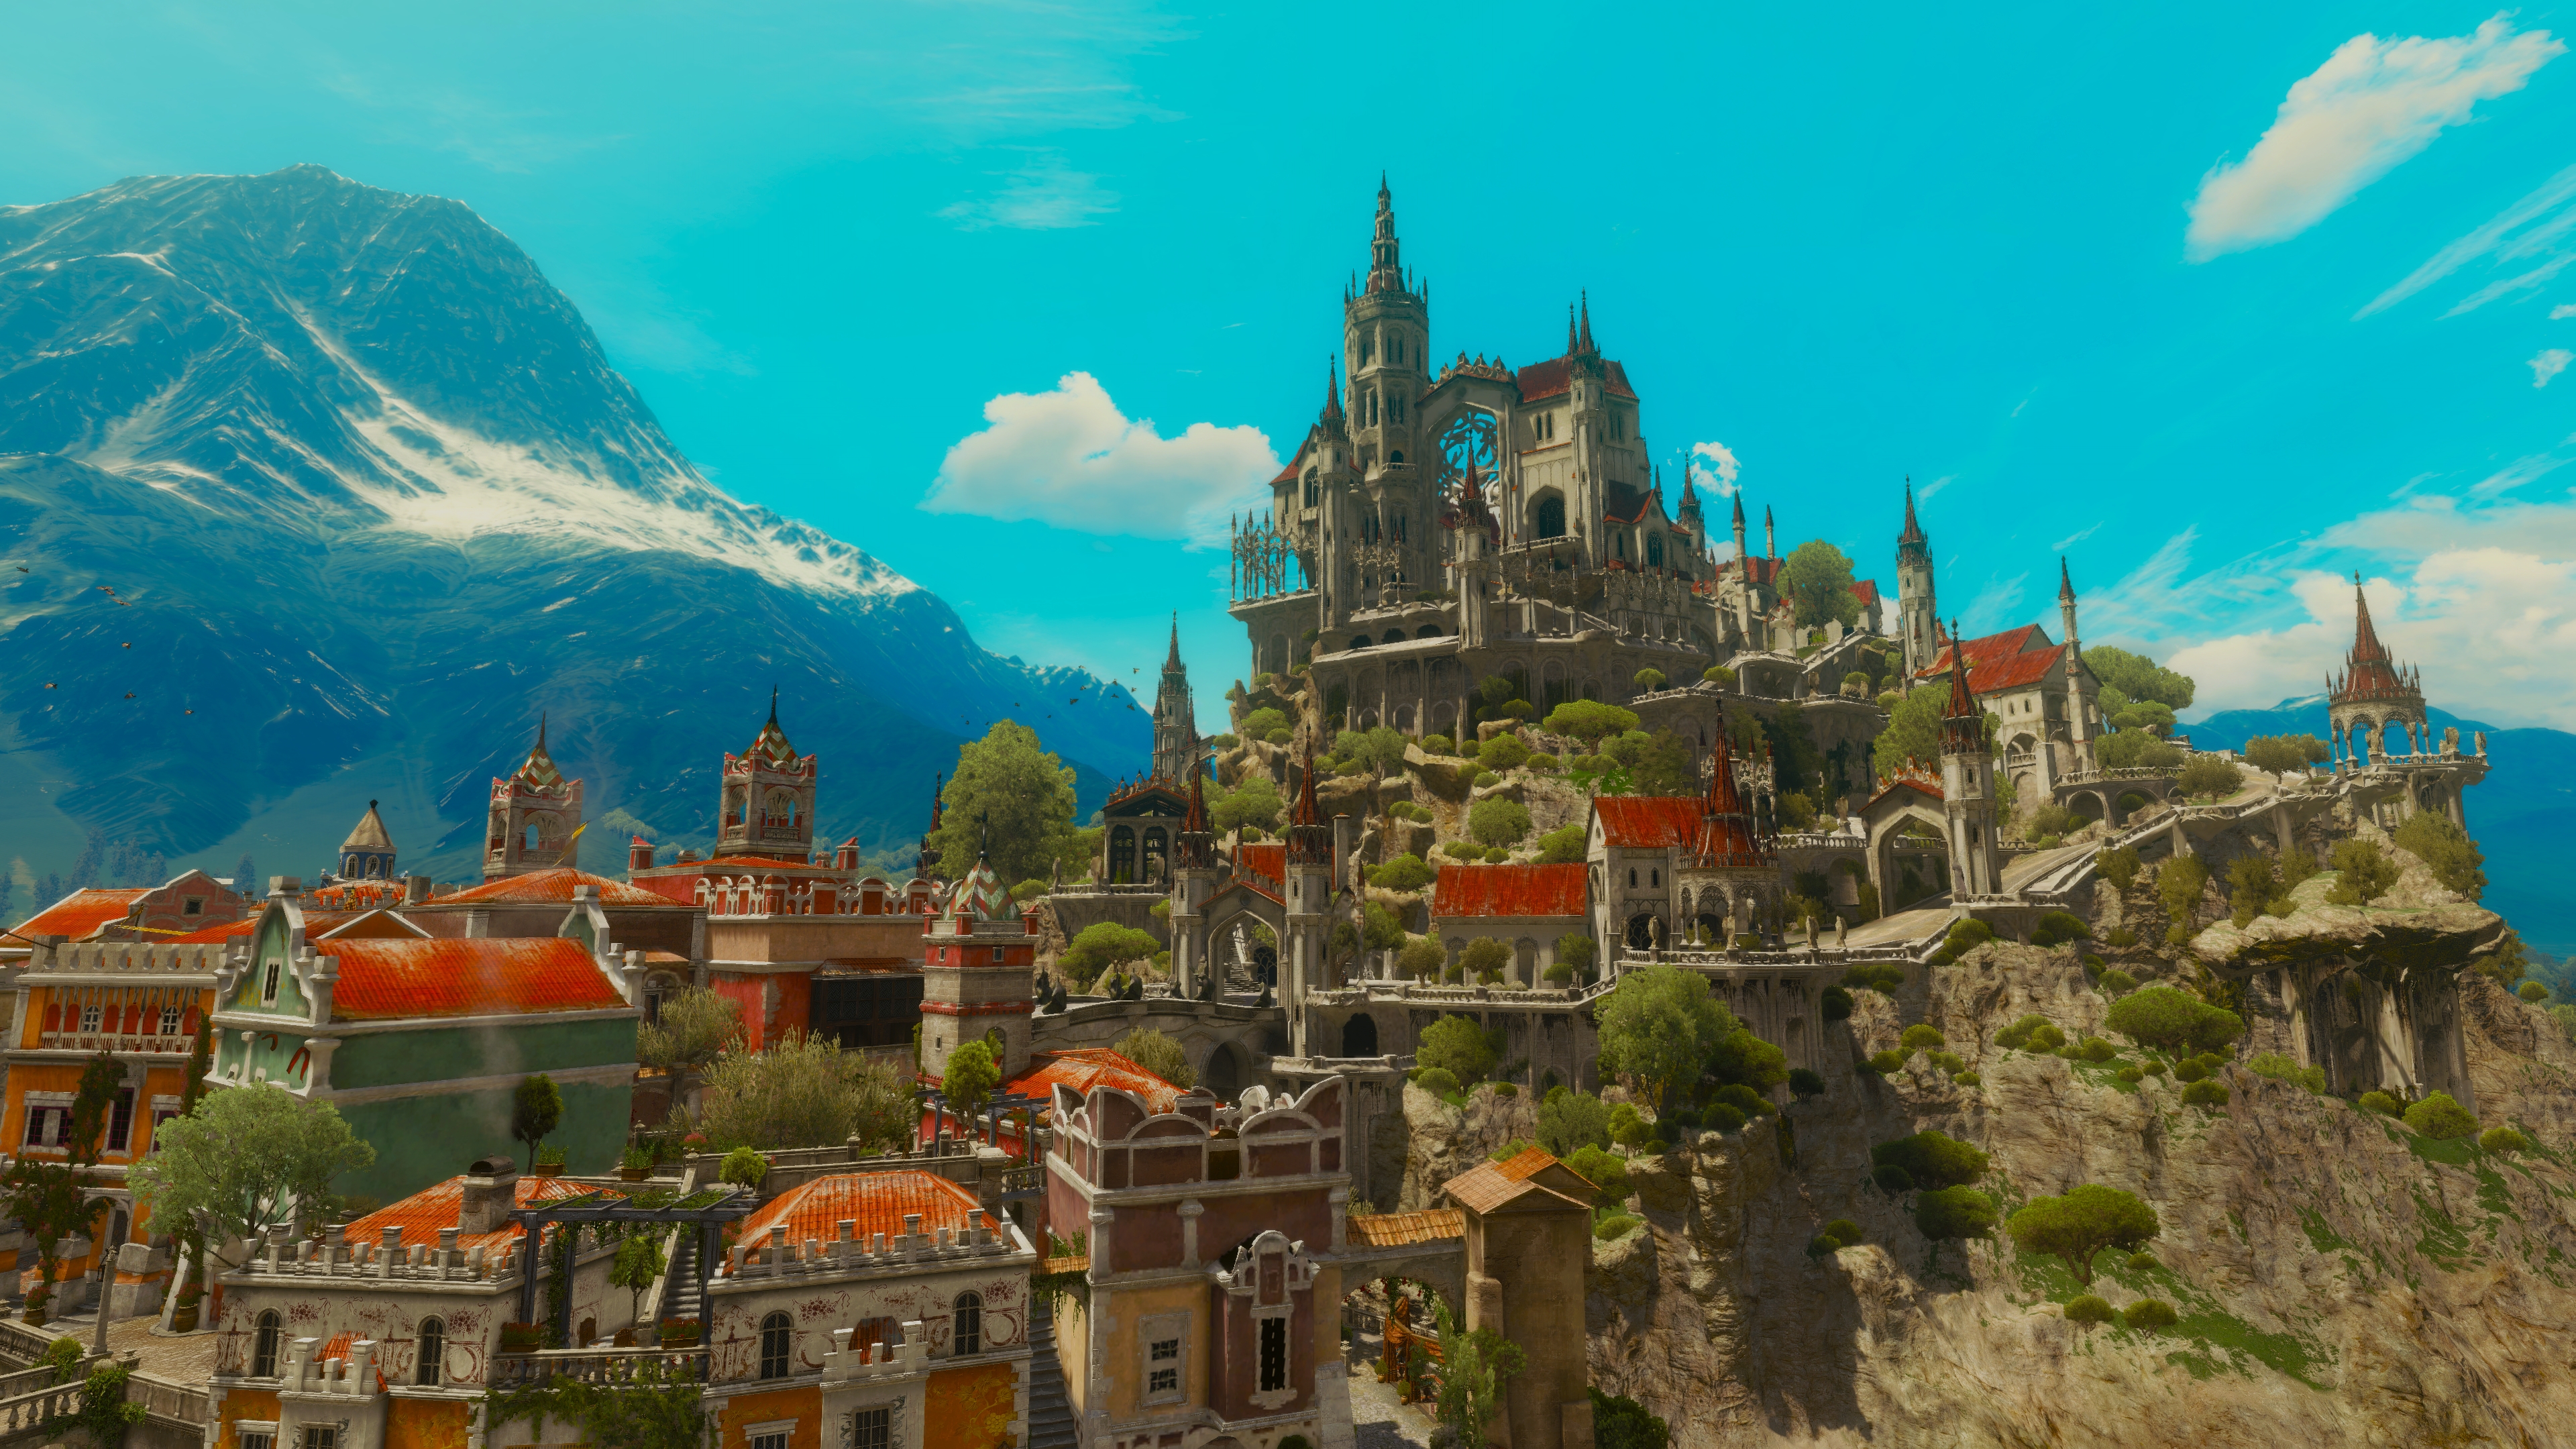 General 3840x2160 The Witcher 3: Wild Hunt PC gaming screen shot The Witcher video games video game art clouds building castle sky CGI sunlight trees